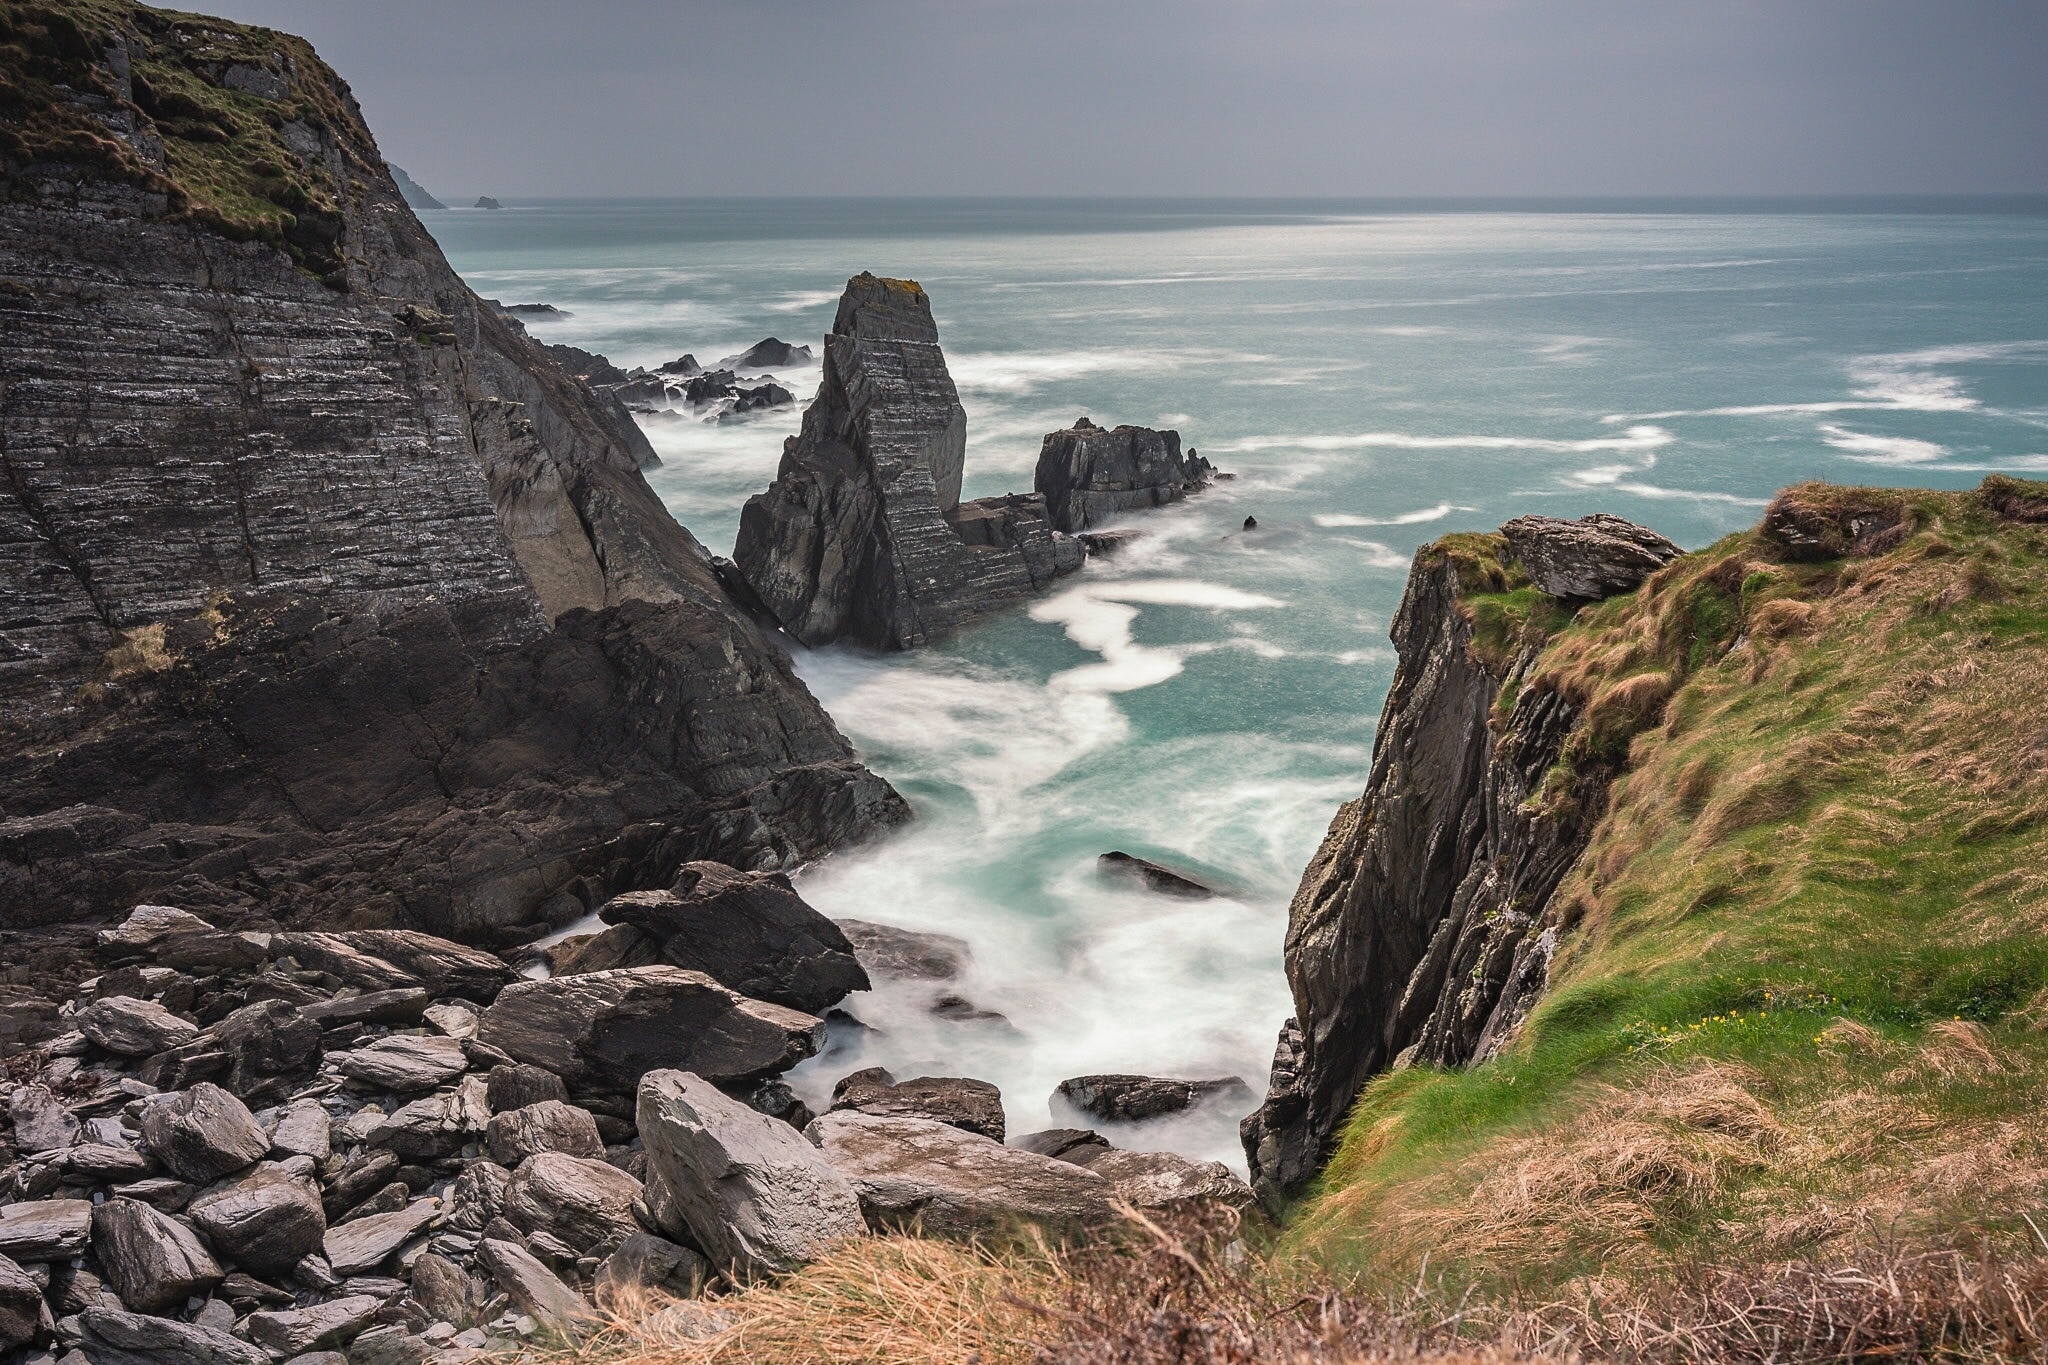 A little cove at 3 Castle Head on the Mizen Peninsular. Long Exposure to exaggerate the wave movements within the cove and on the surrounding rocks.